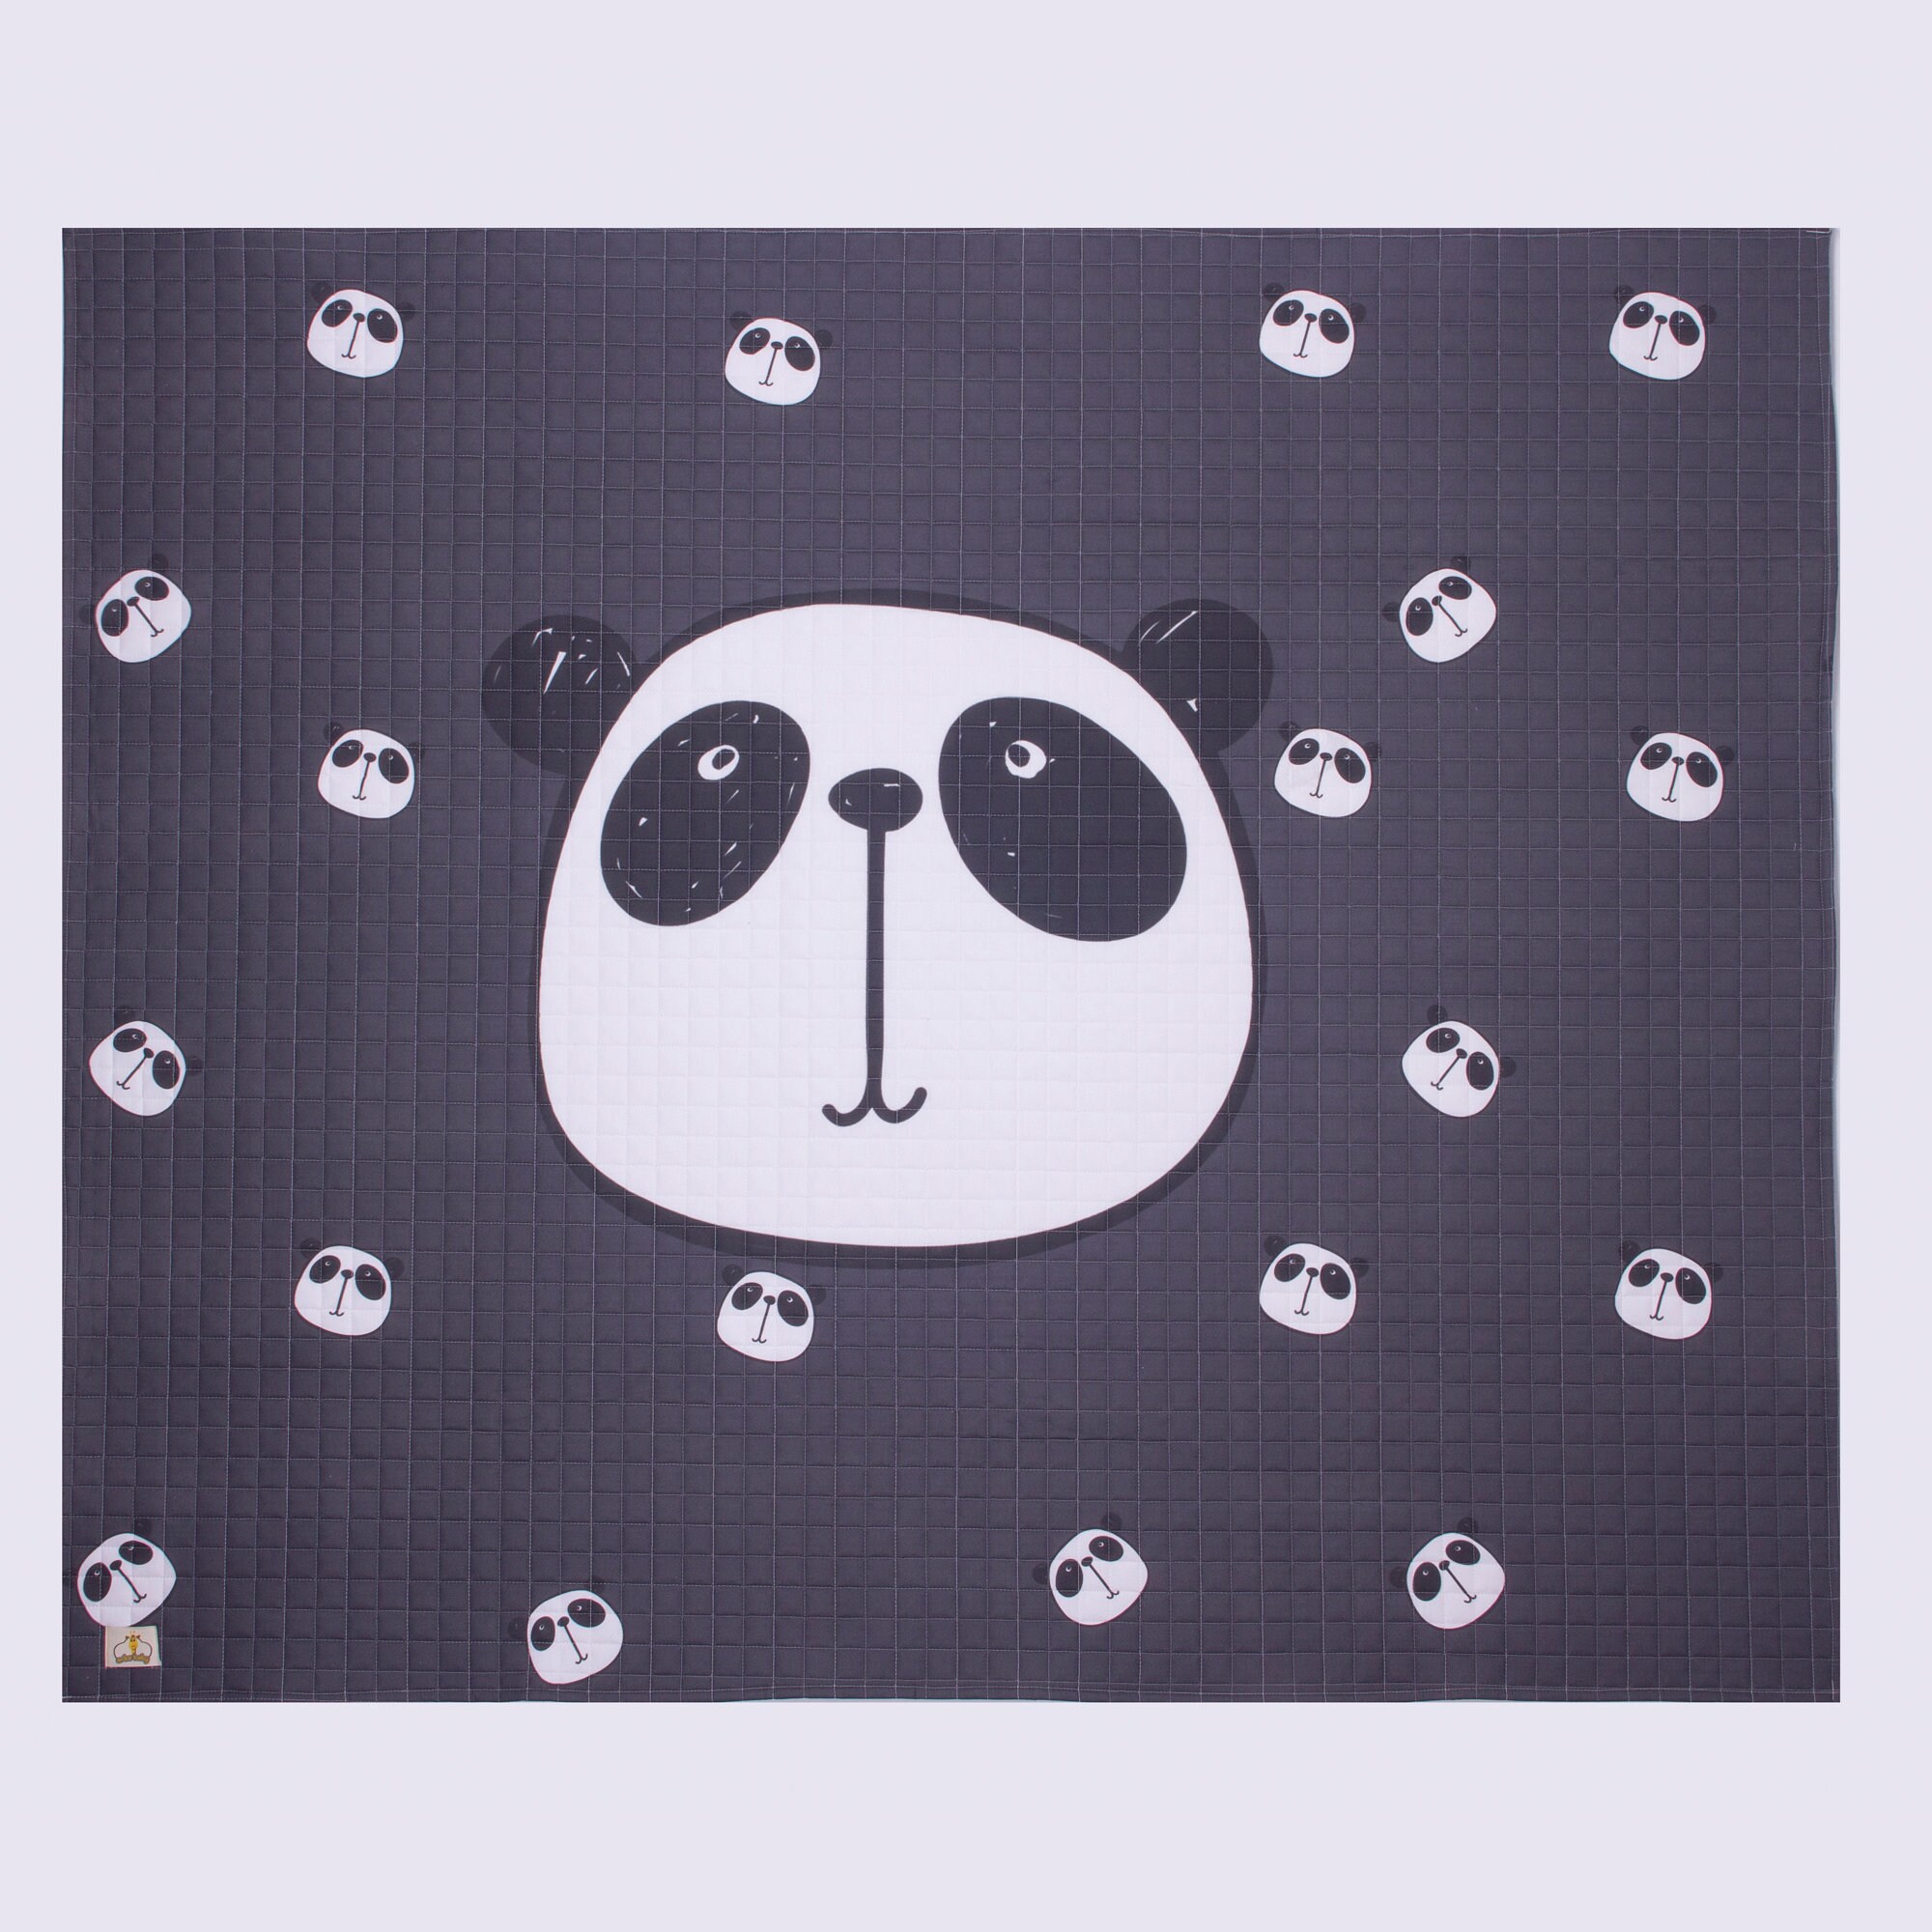 Cute Panda Pattern Mat for Crawling Soft Baby Play Mat Folding Play Mat For Baby Room Decor Baby Yoga And Baby Play Gym Mat